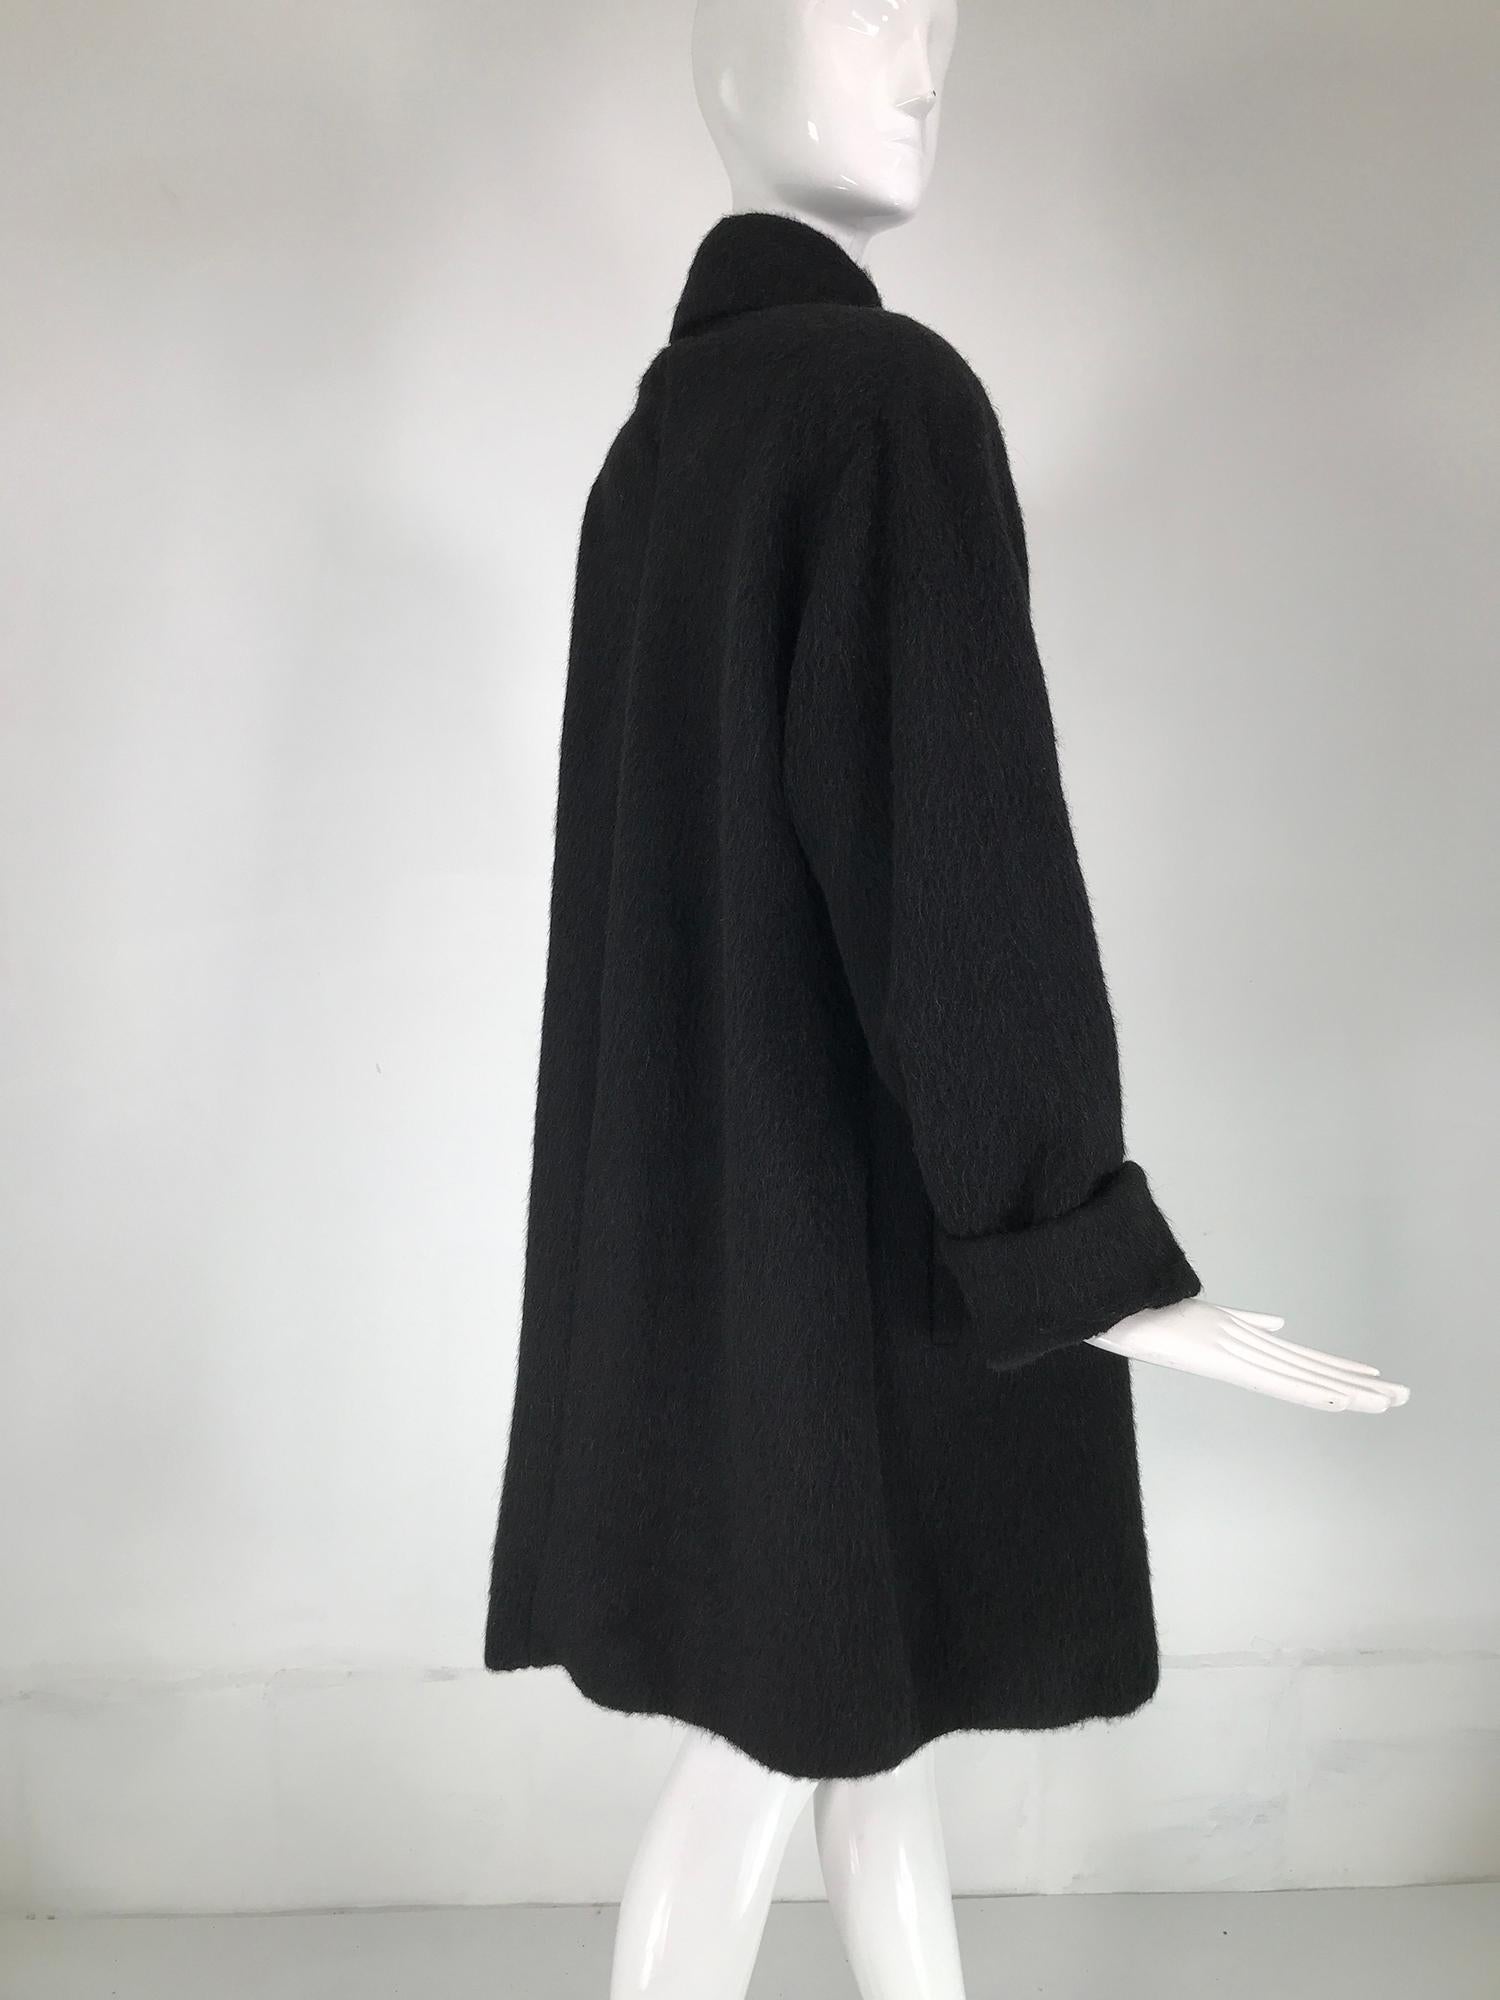 Black Christian Dior Charcoal Grey Mohair & Wool Winter Coat 1980s For Sale